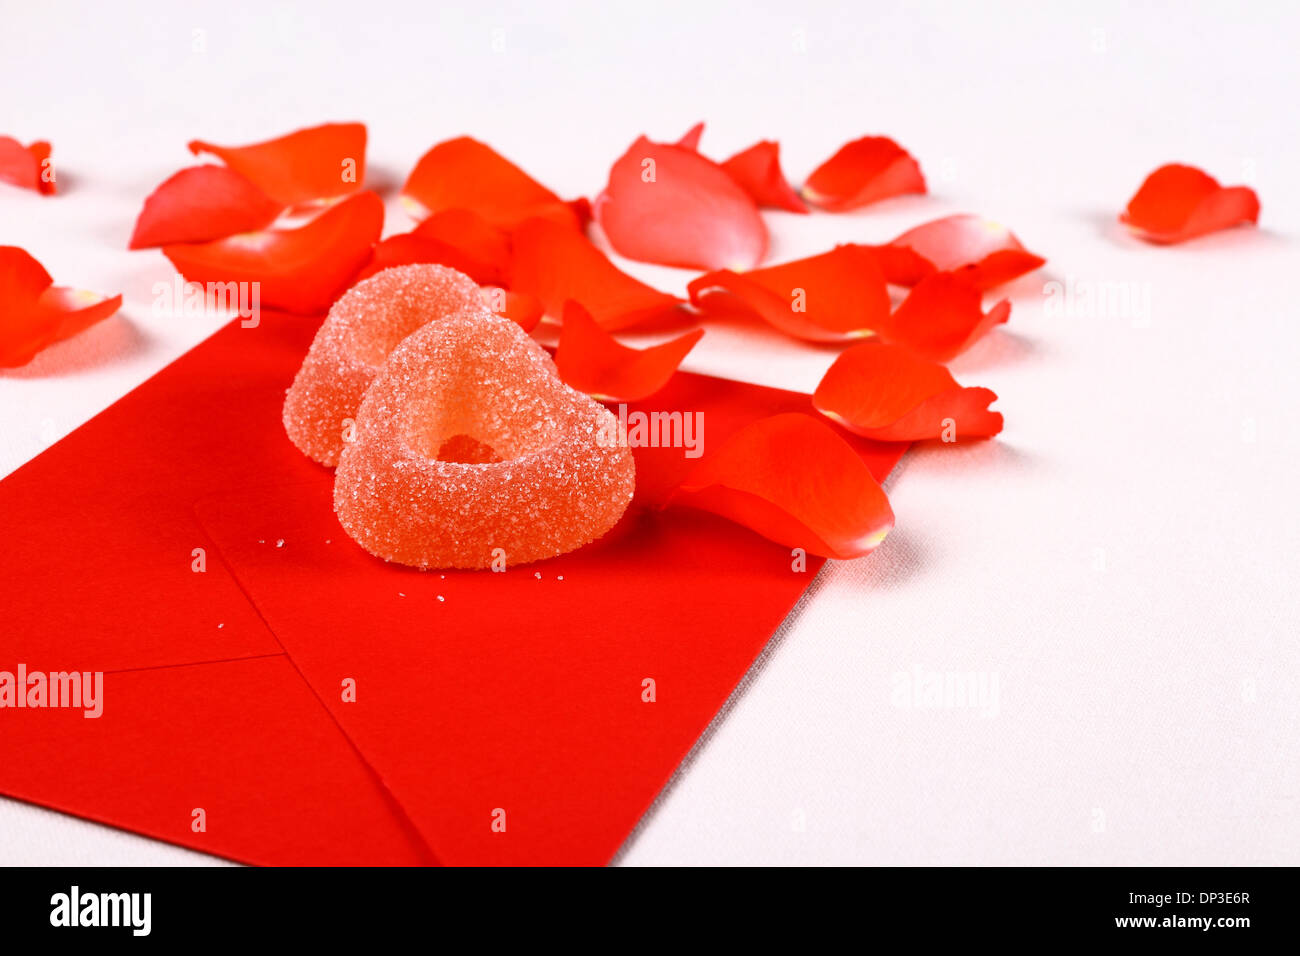 Two hearts from sugar candies on red envelope and petals, close up Stock Photo